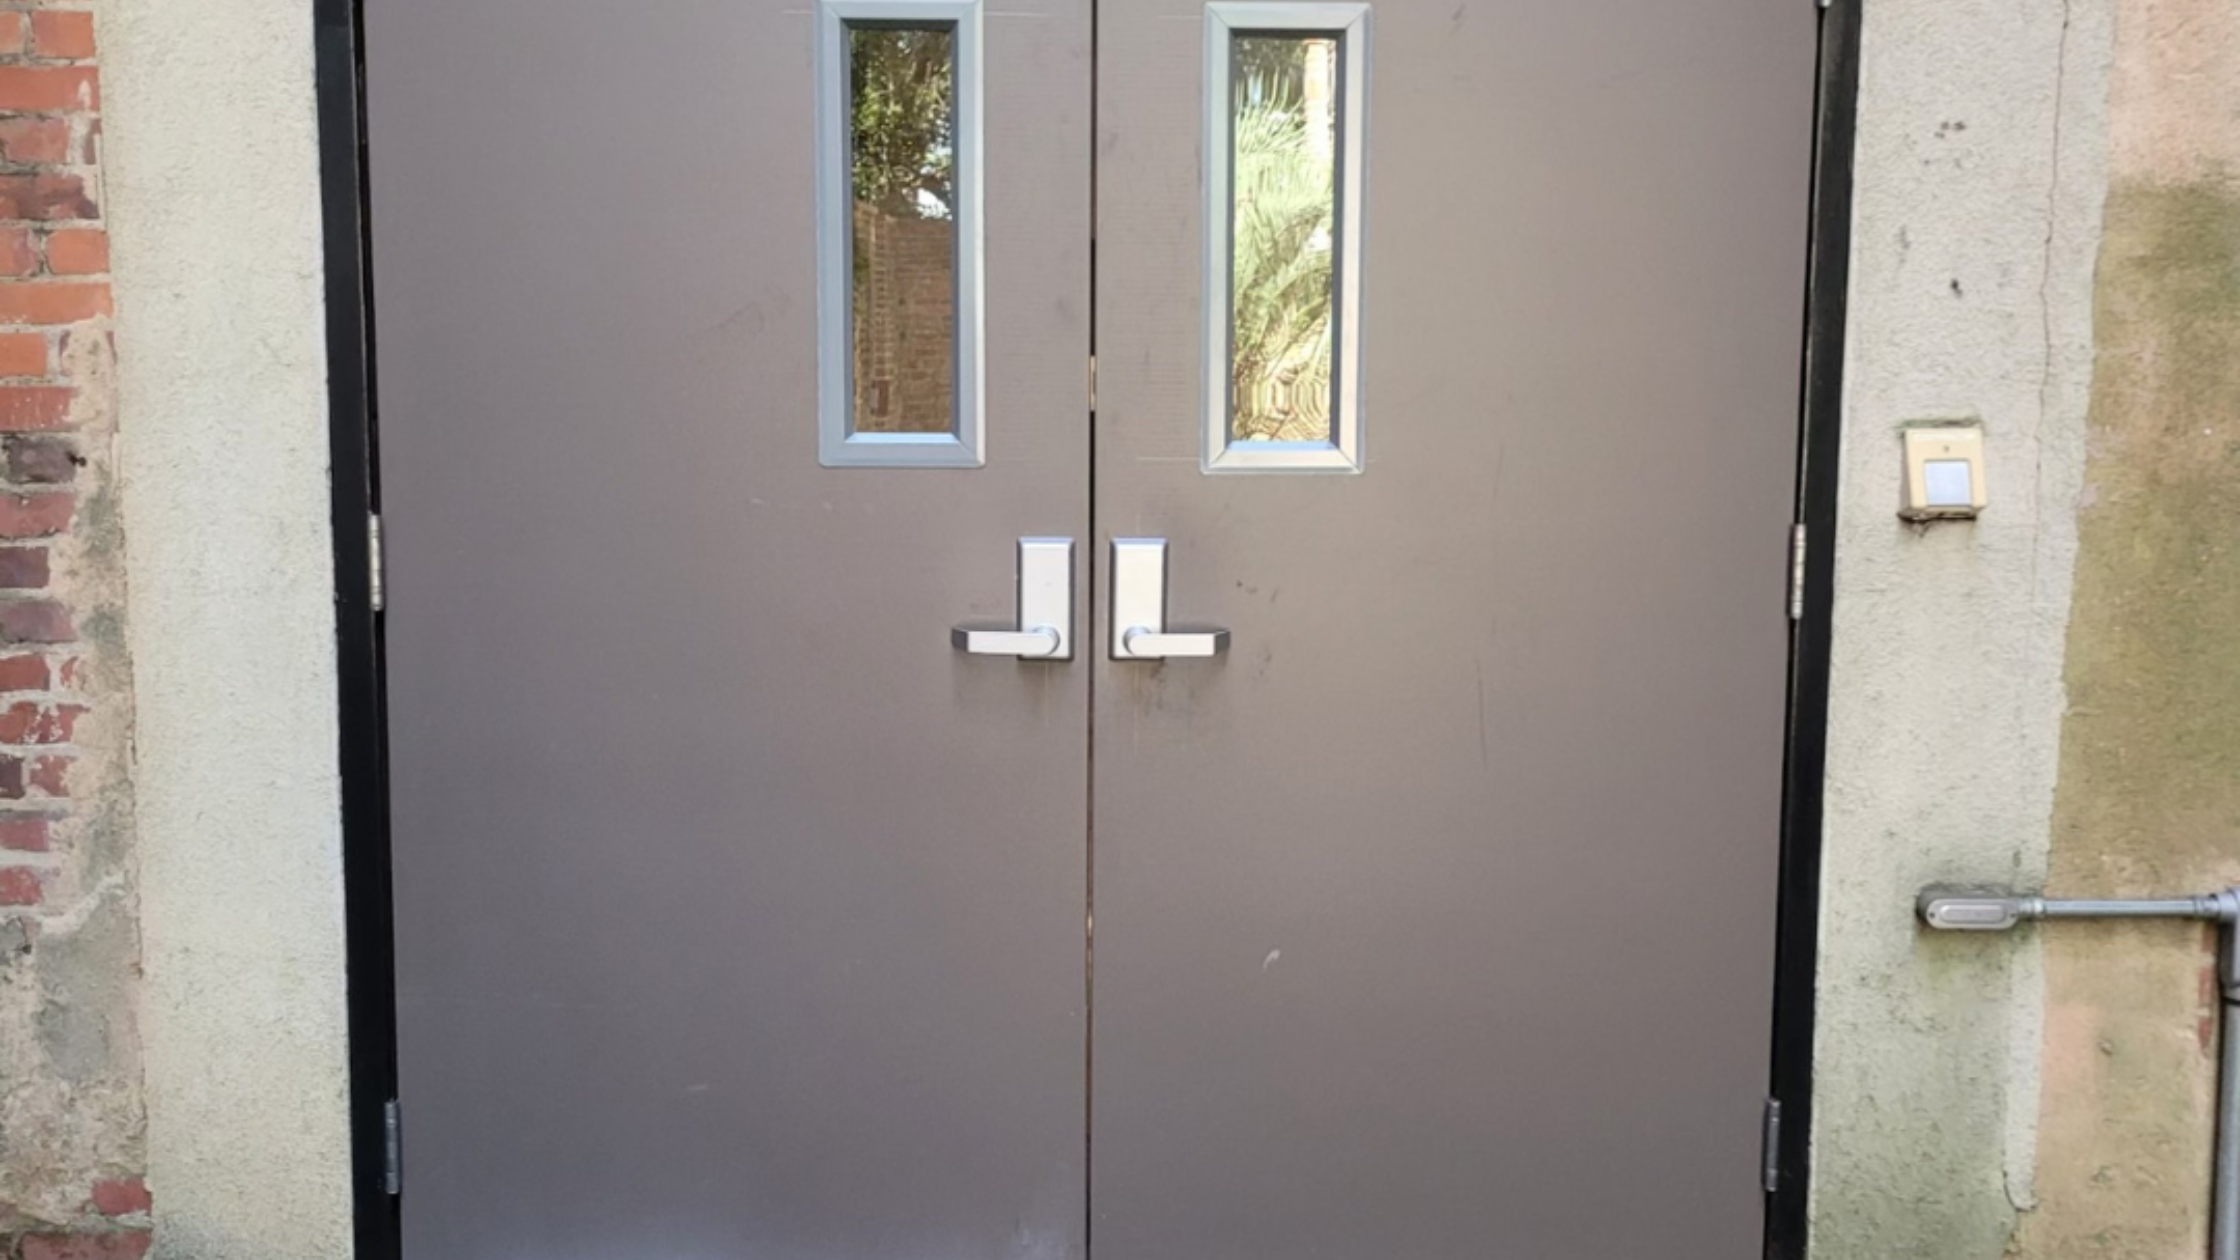 metal fire-rated entry doors with glass window